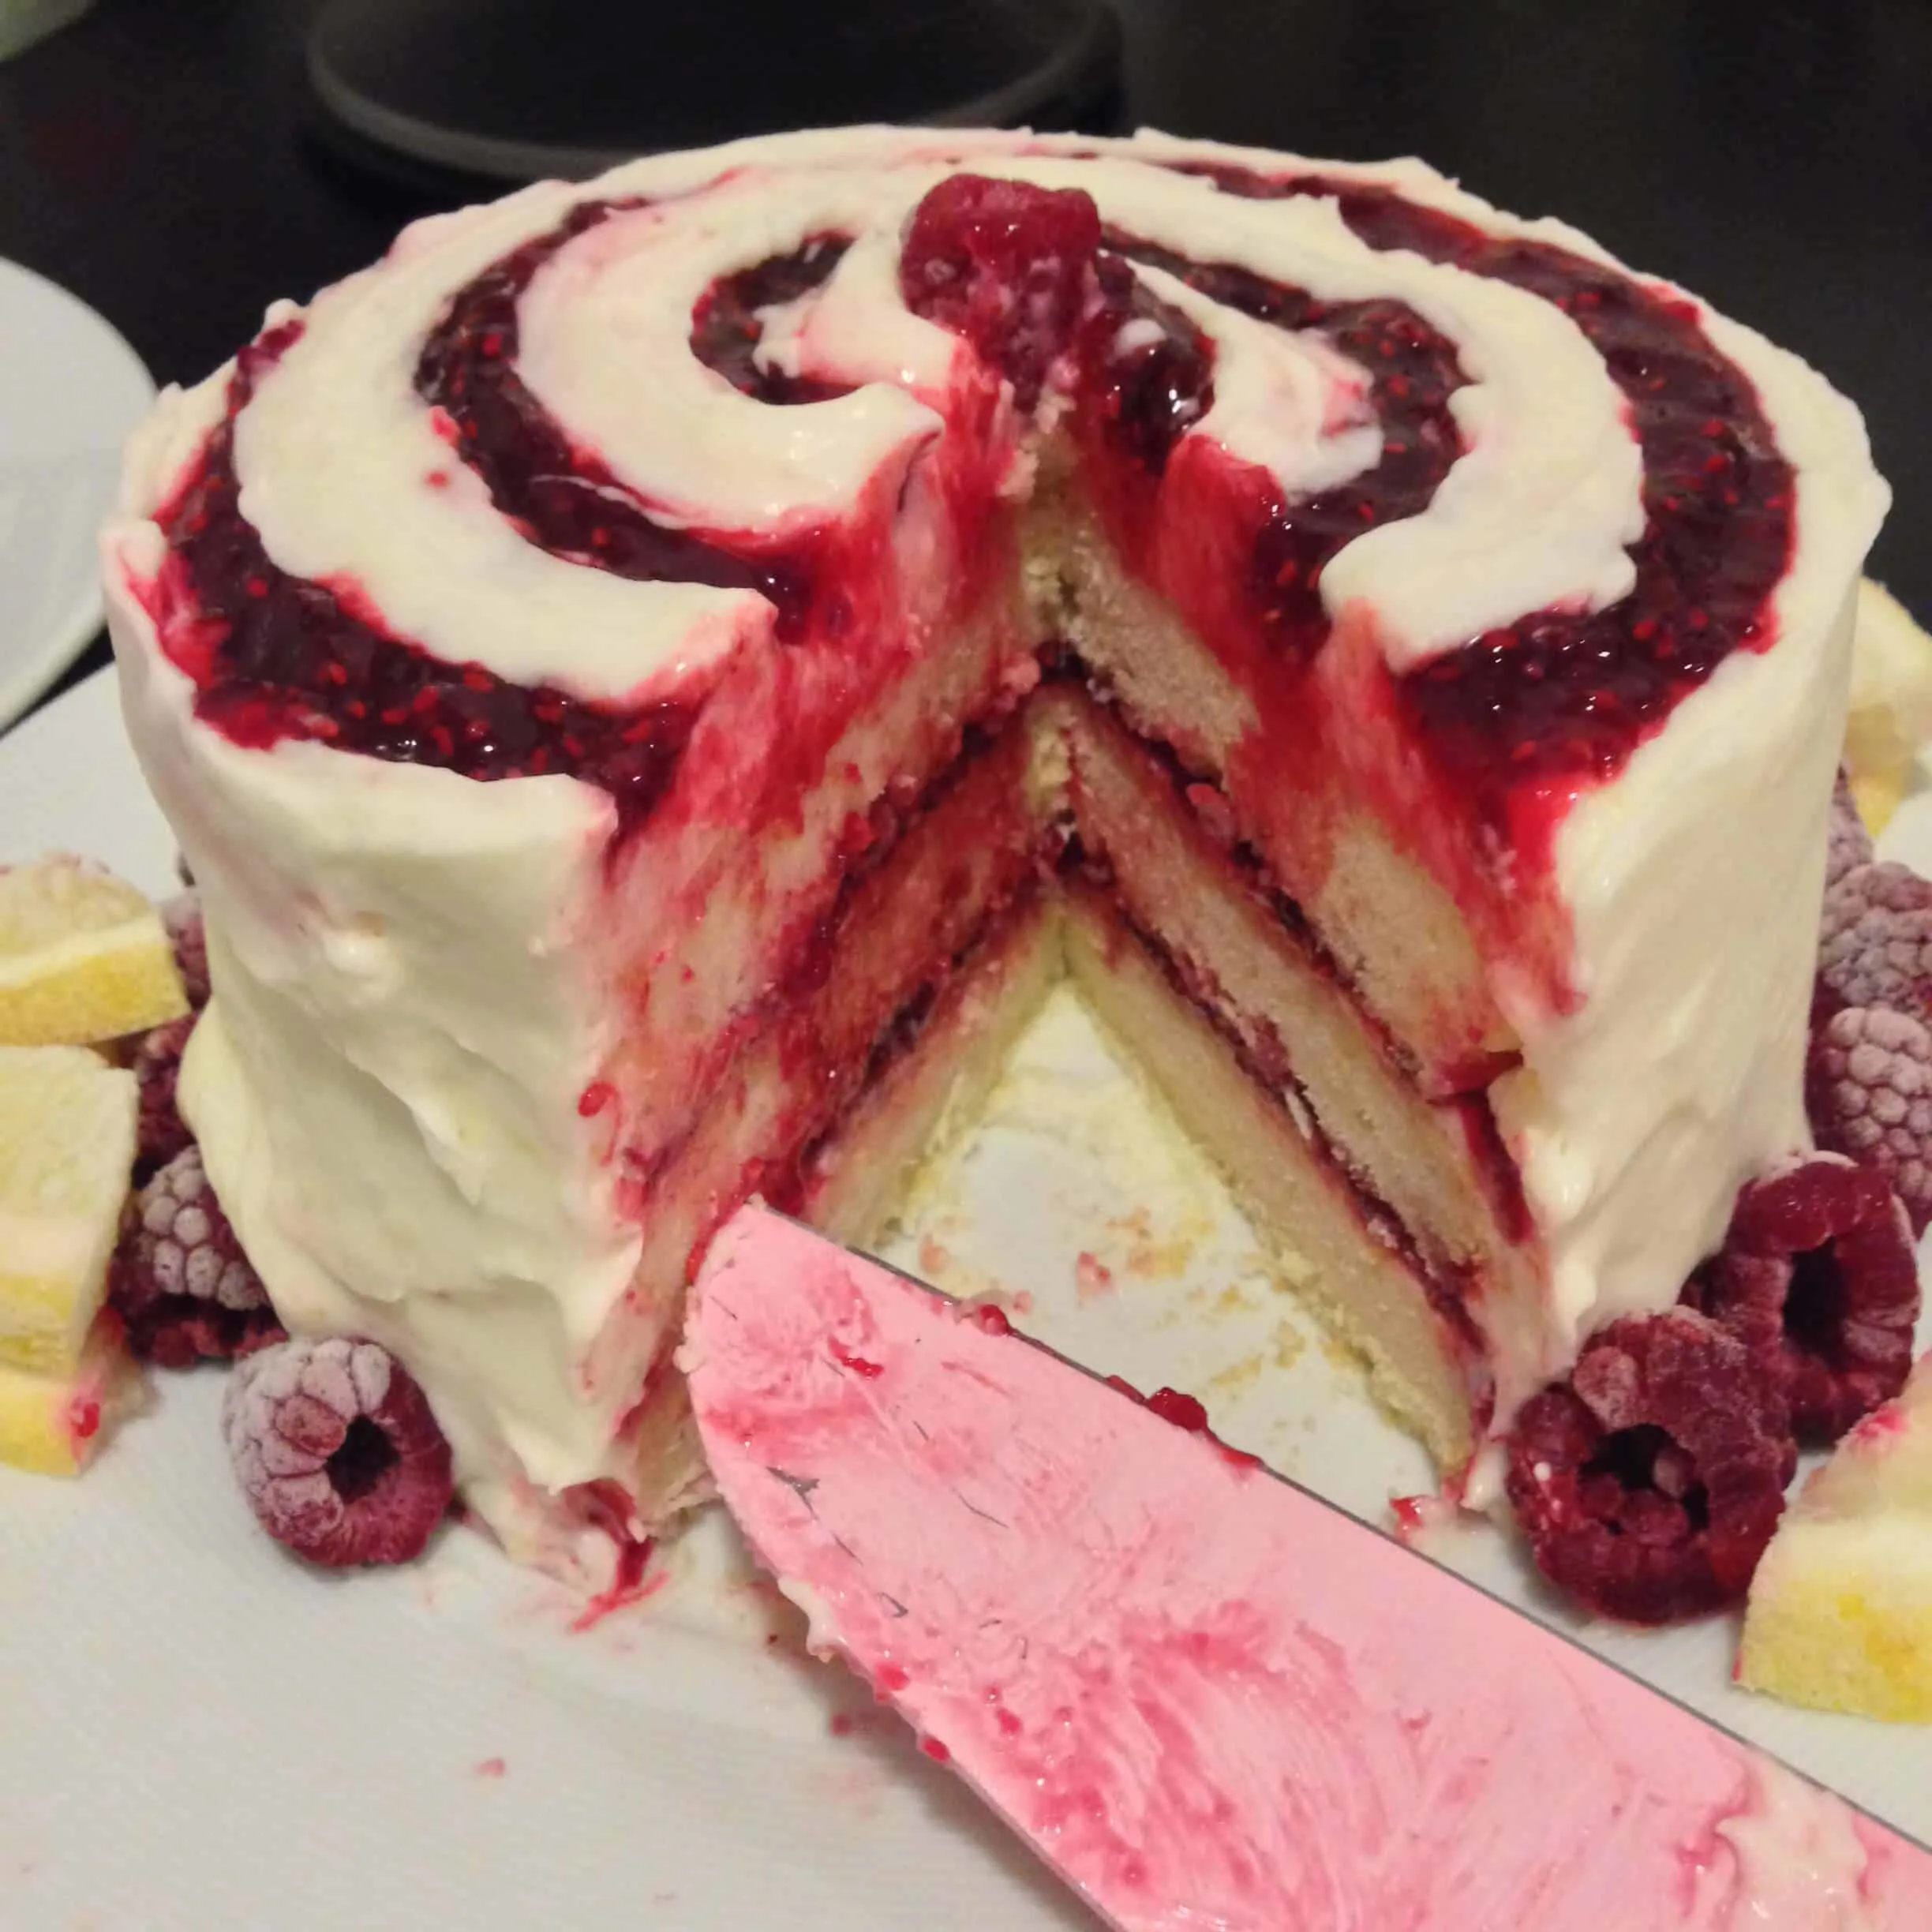 image of a lemon raspberry cake made with raspberry compote and cream cheese frosting